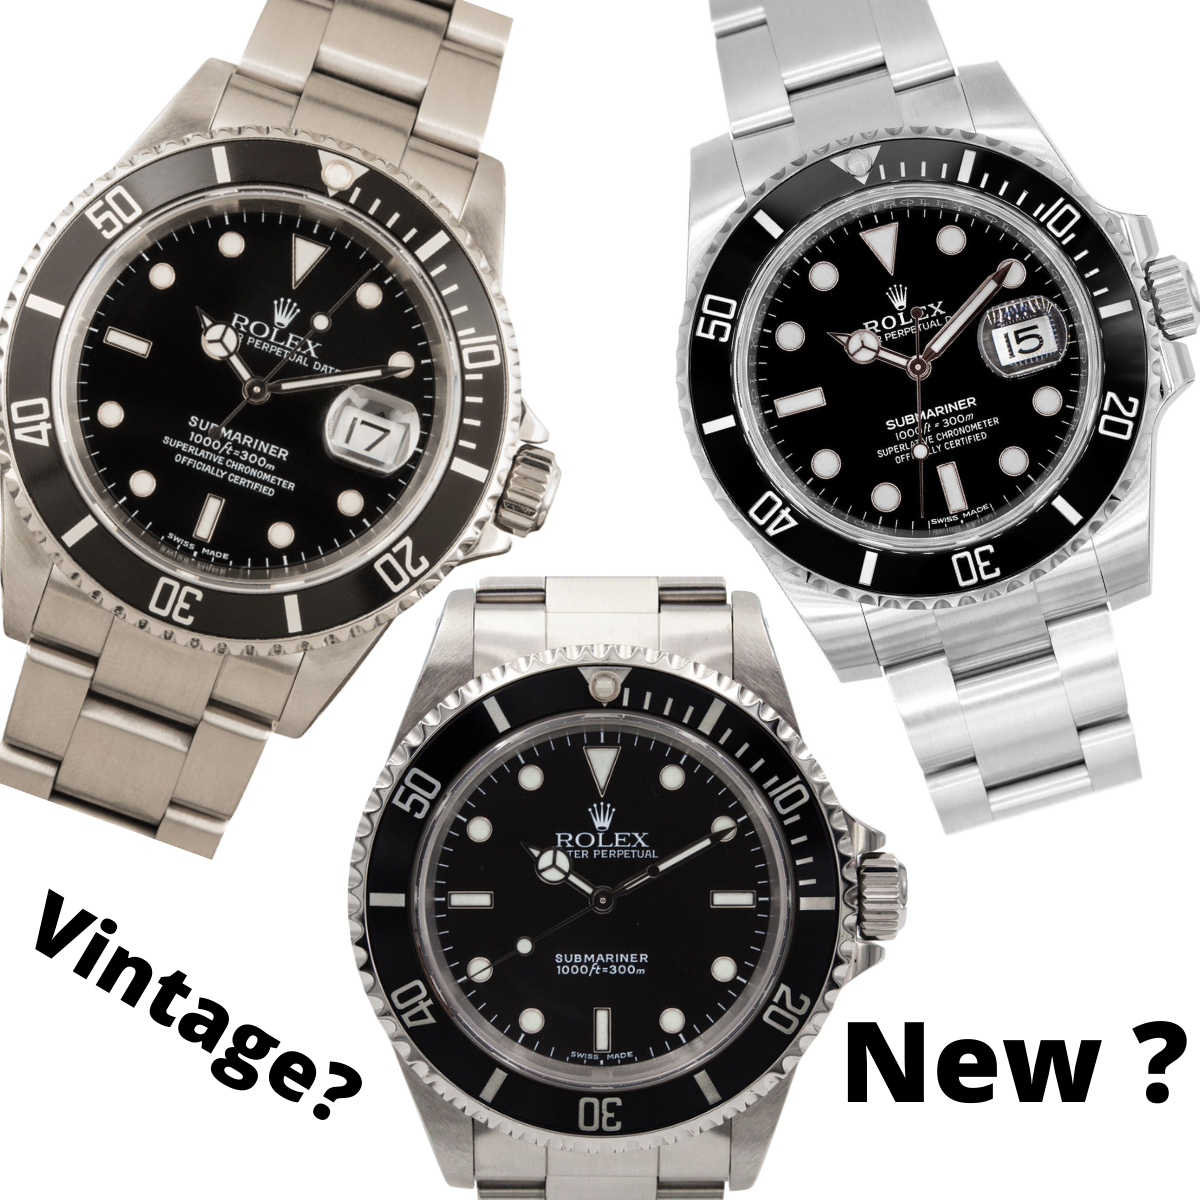 Professional Advice On Buying Your First Rolex Submariner